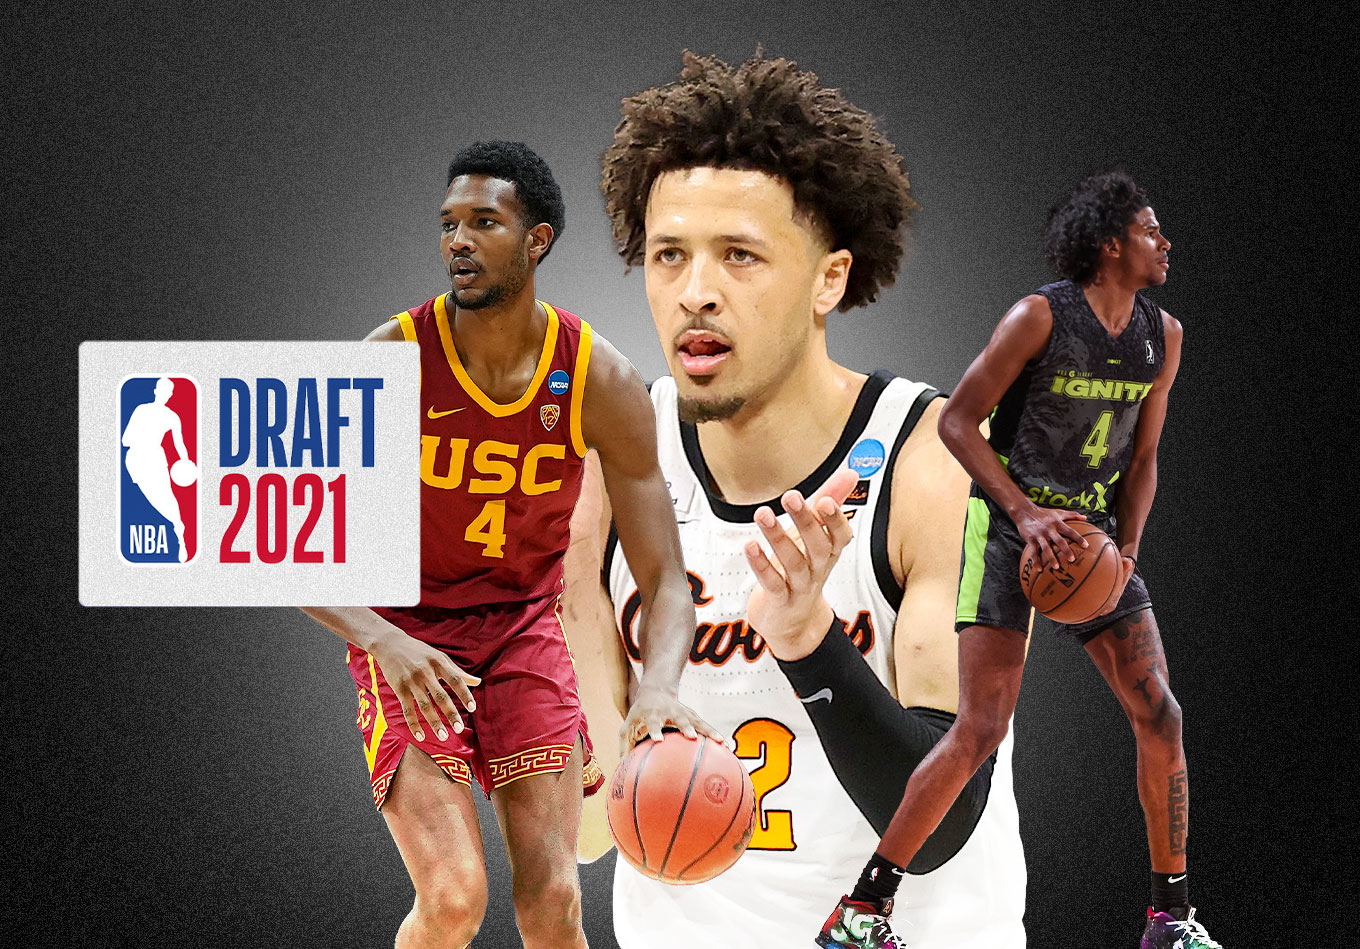 The Analyst’s NBA Mock Draft: Why Things Could Go off the Rails at 7